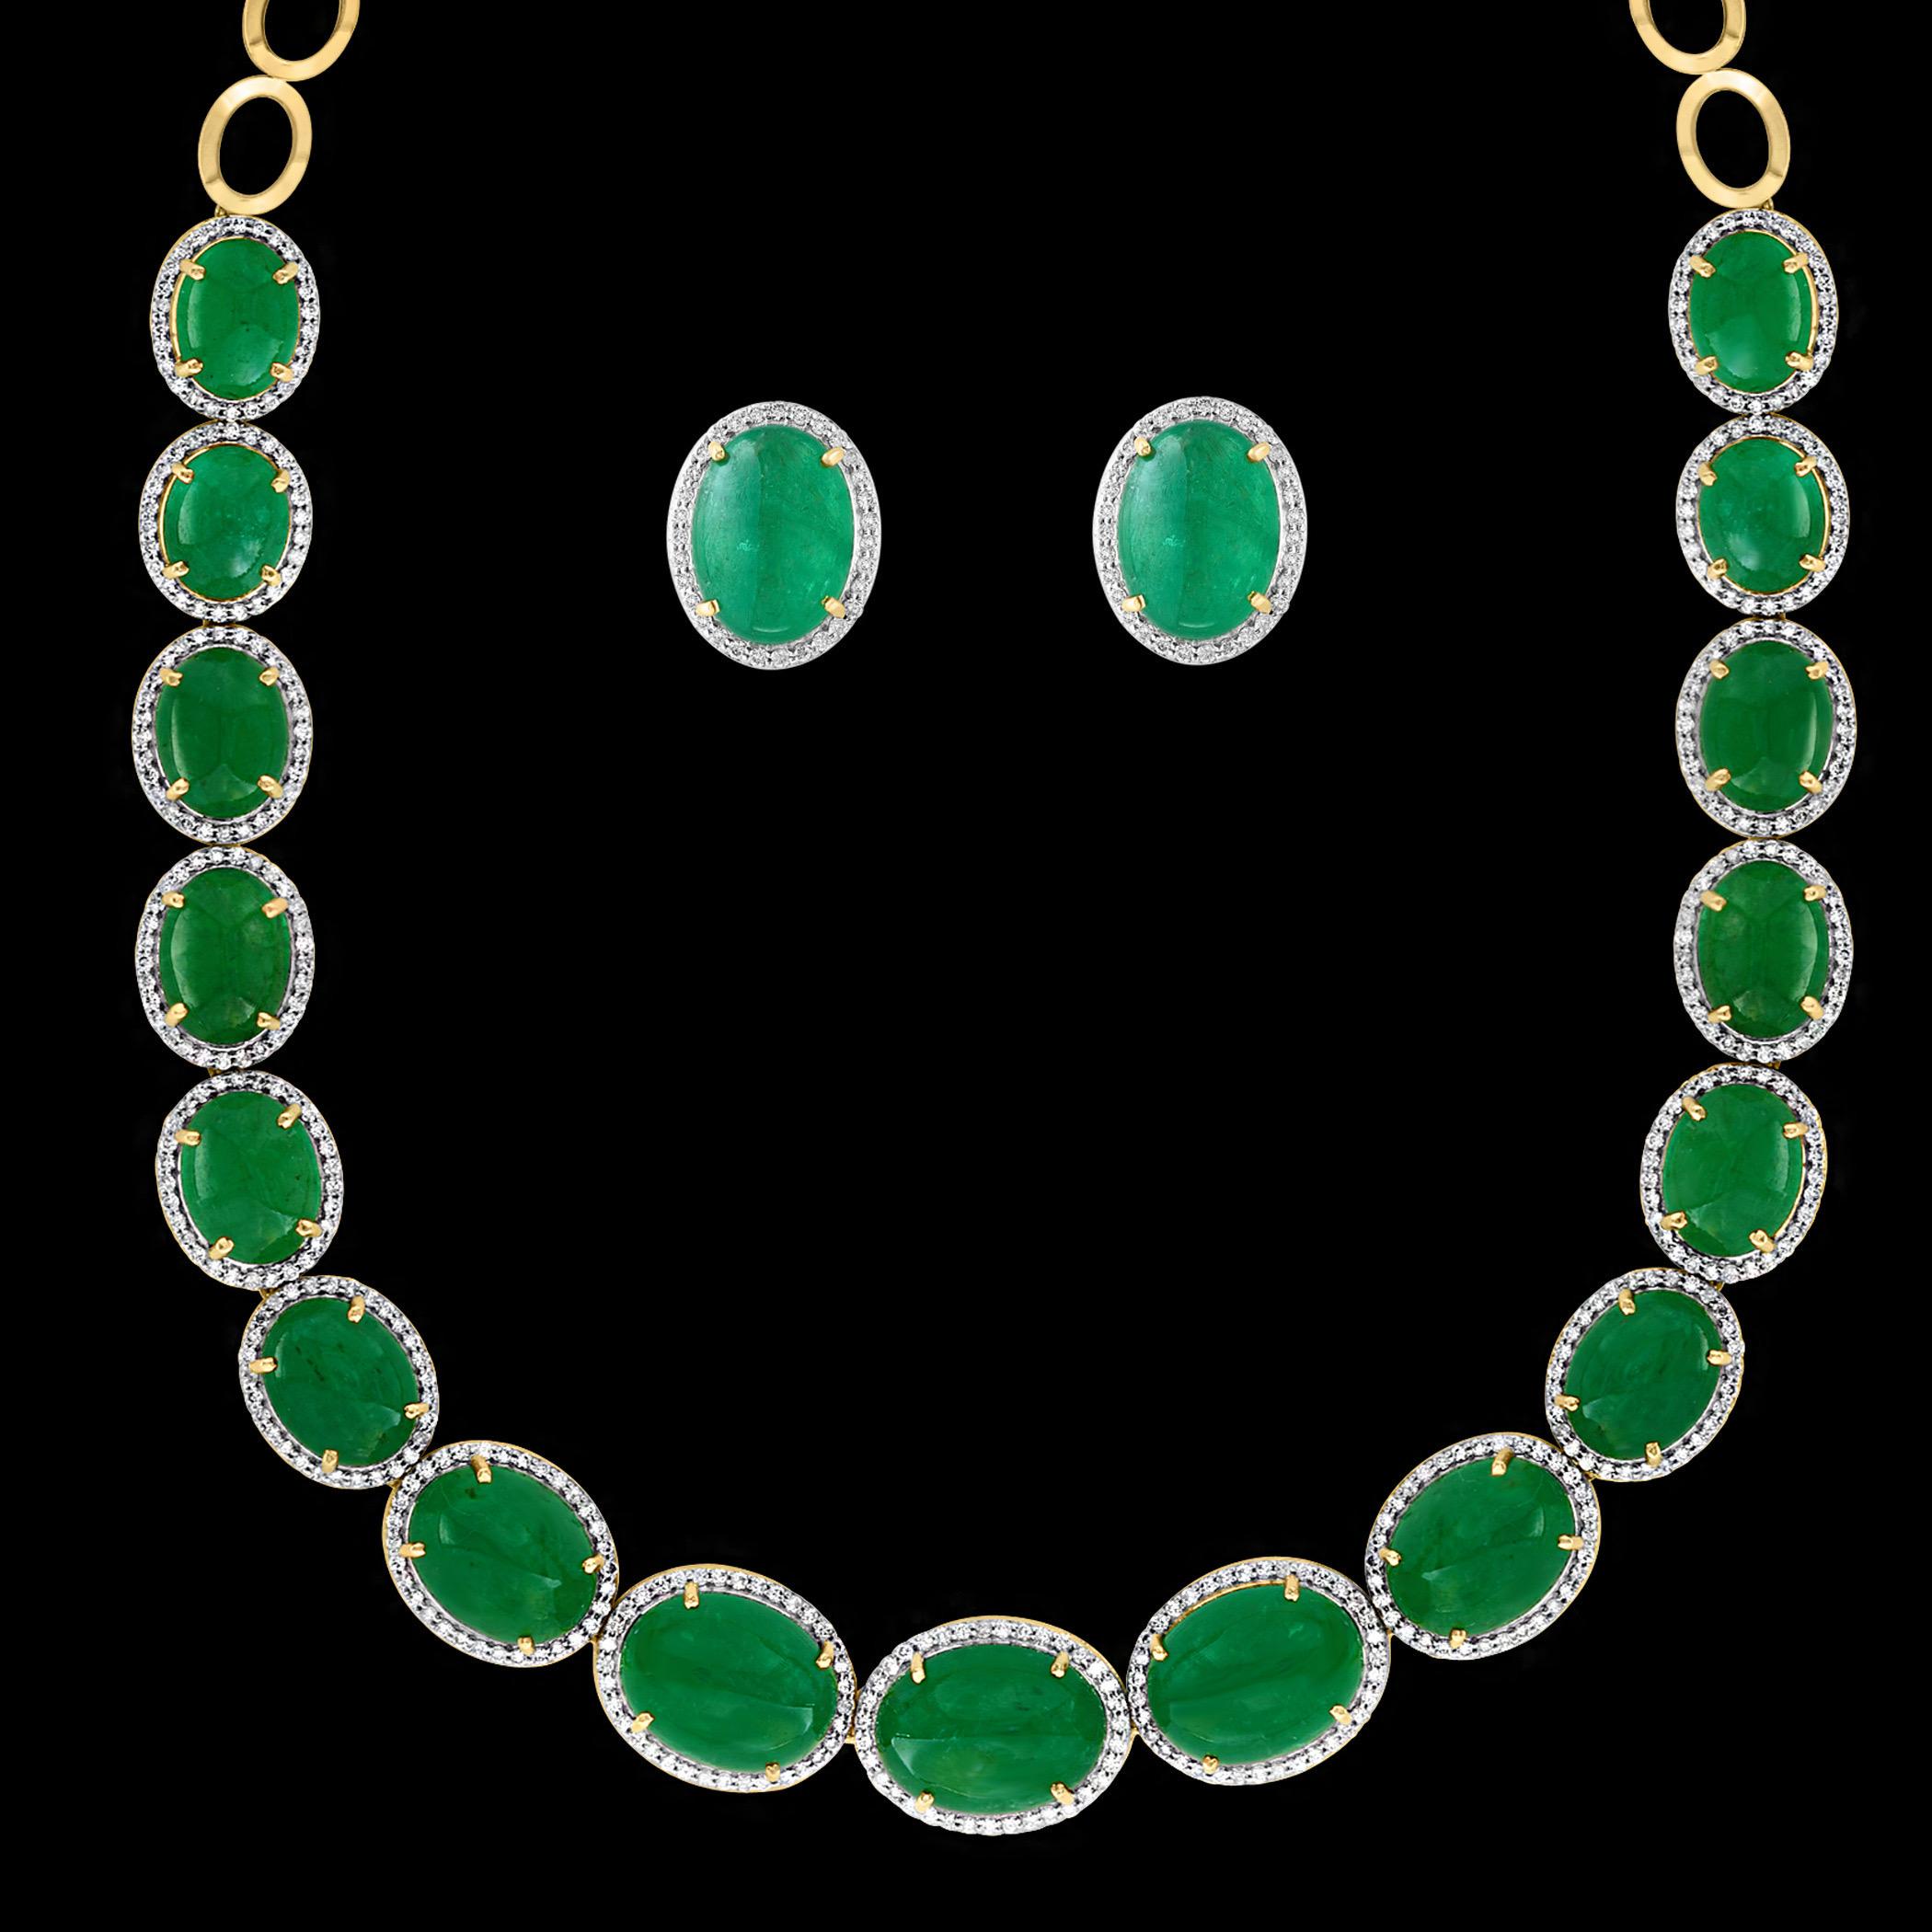 110 Ct Oval Natural Cabochon Emerald & Diamond Necklace, Earring Suite 14 K Gold For Sale 2